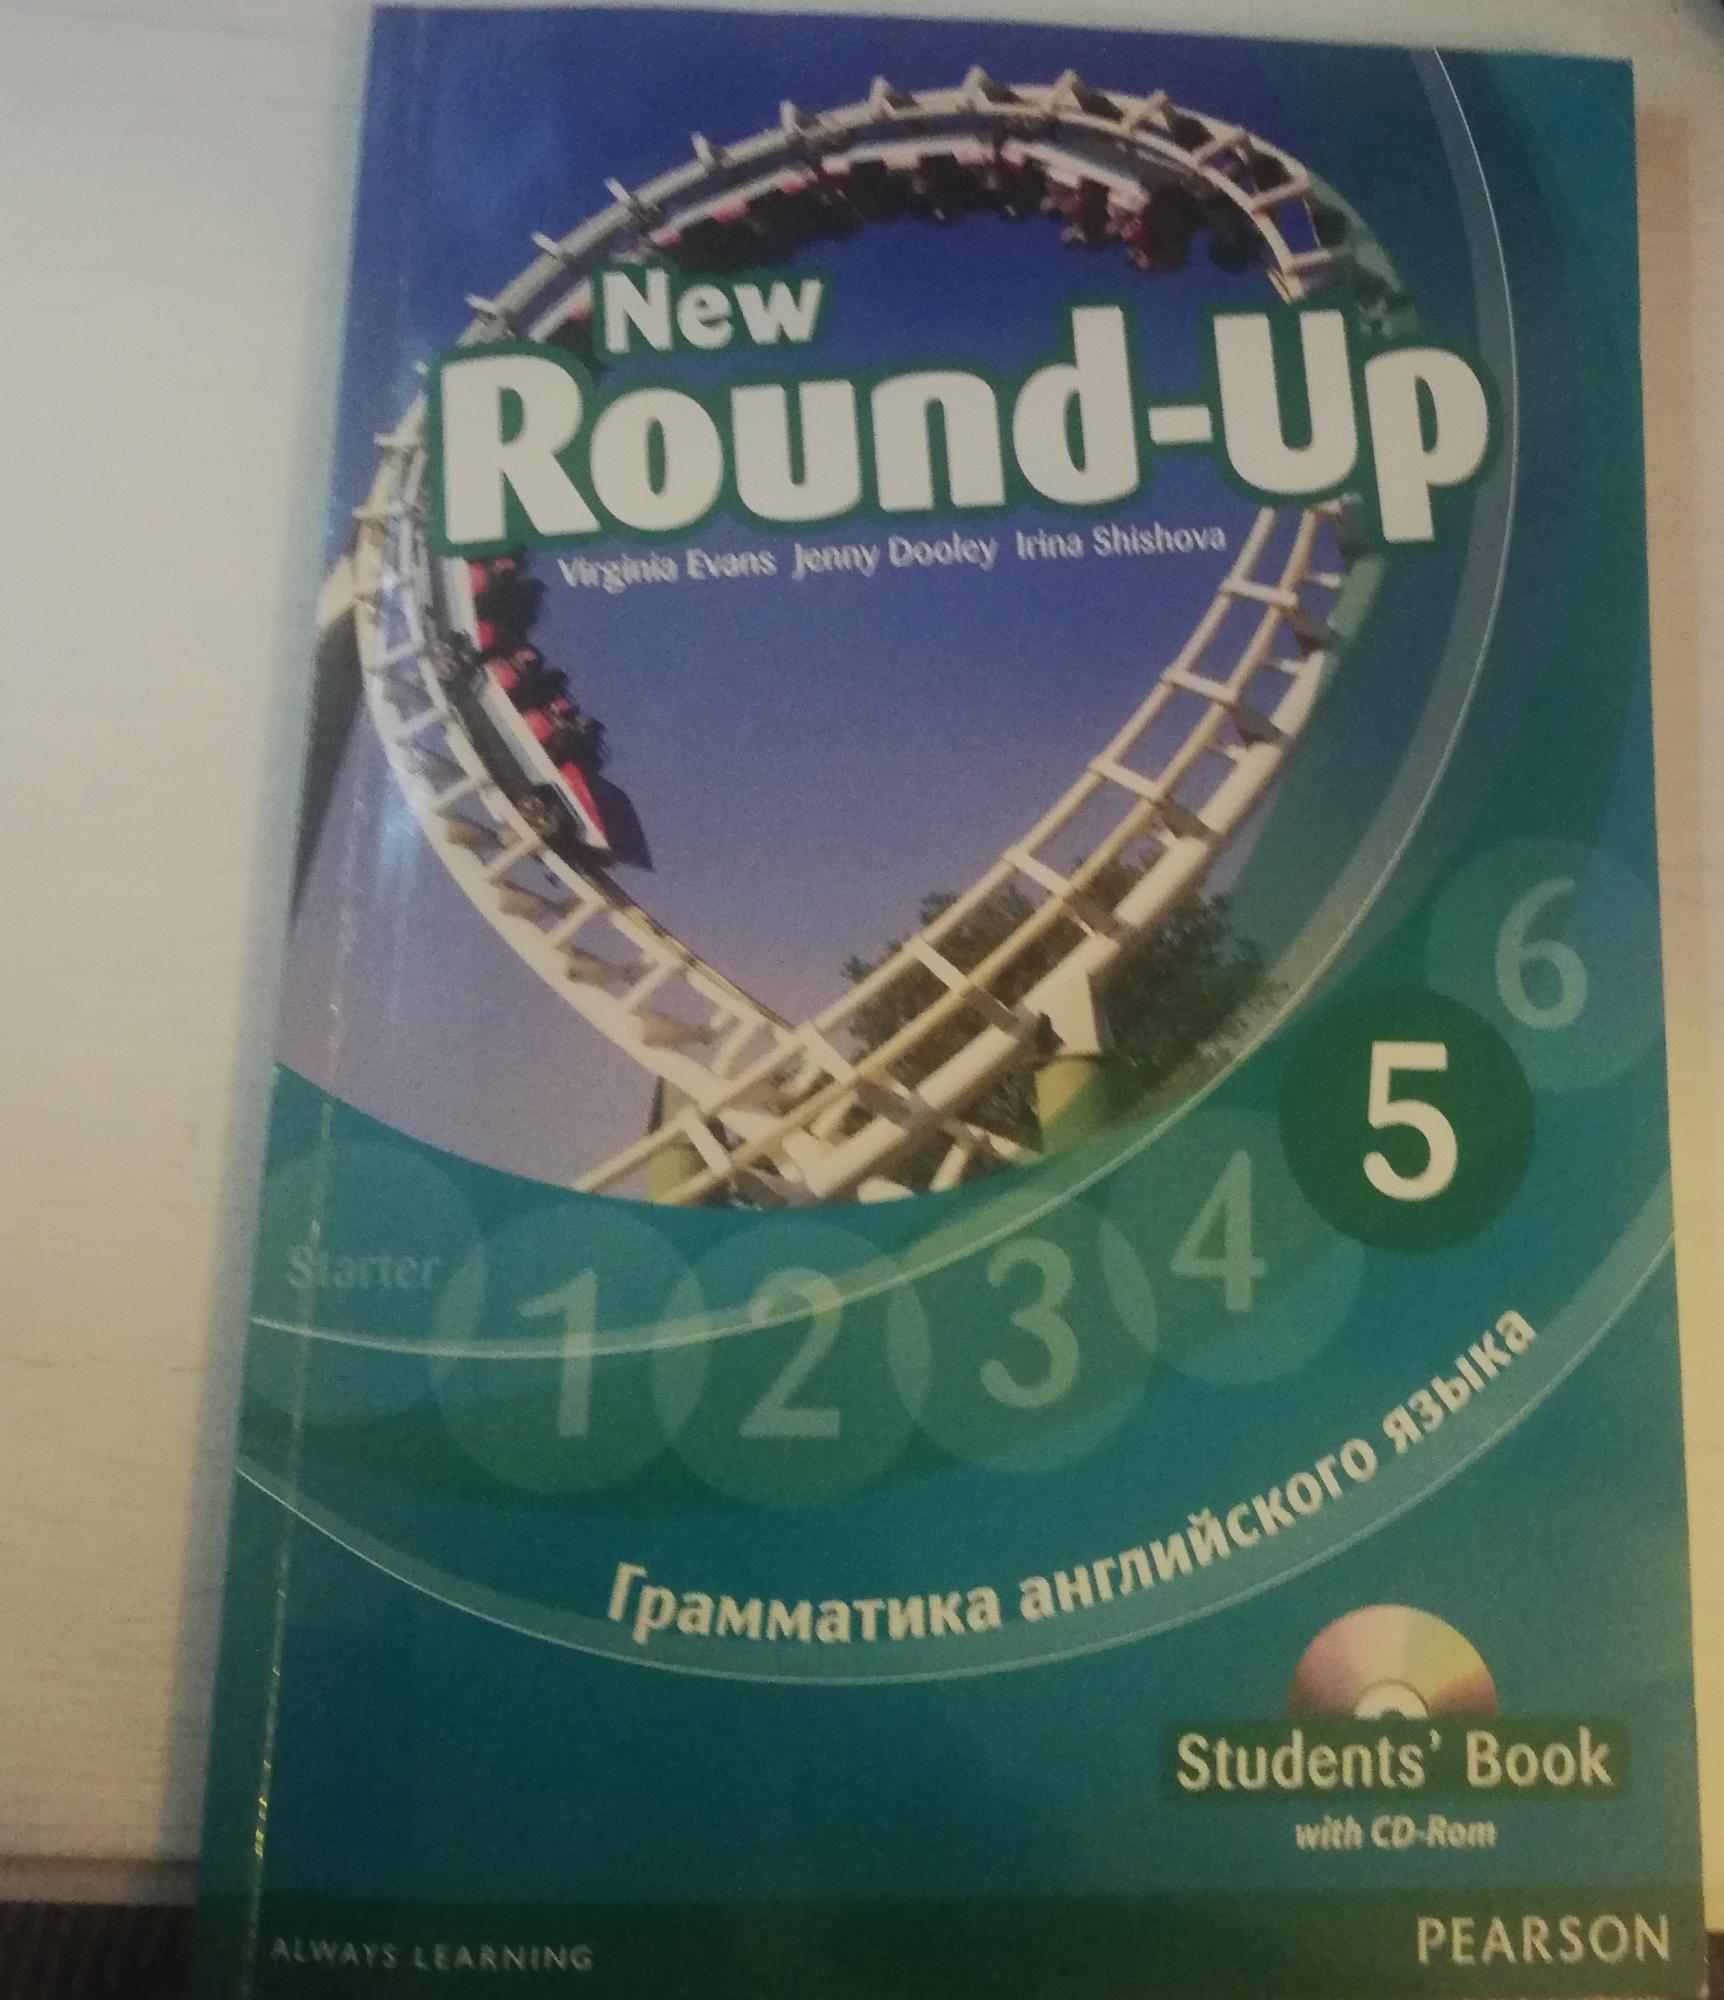 New round up 4 students. New Round up 5. Учебник Round up 5. Учебник Round up 1. New Round up 1.